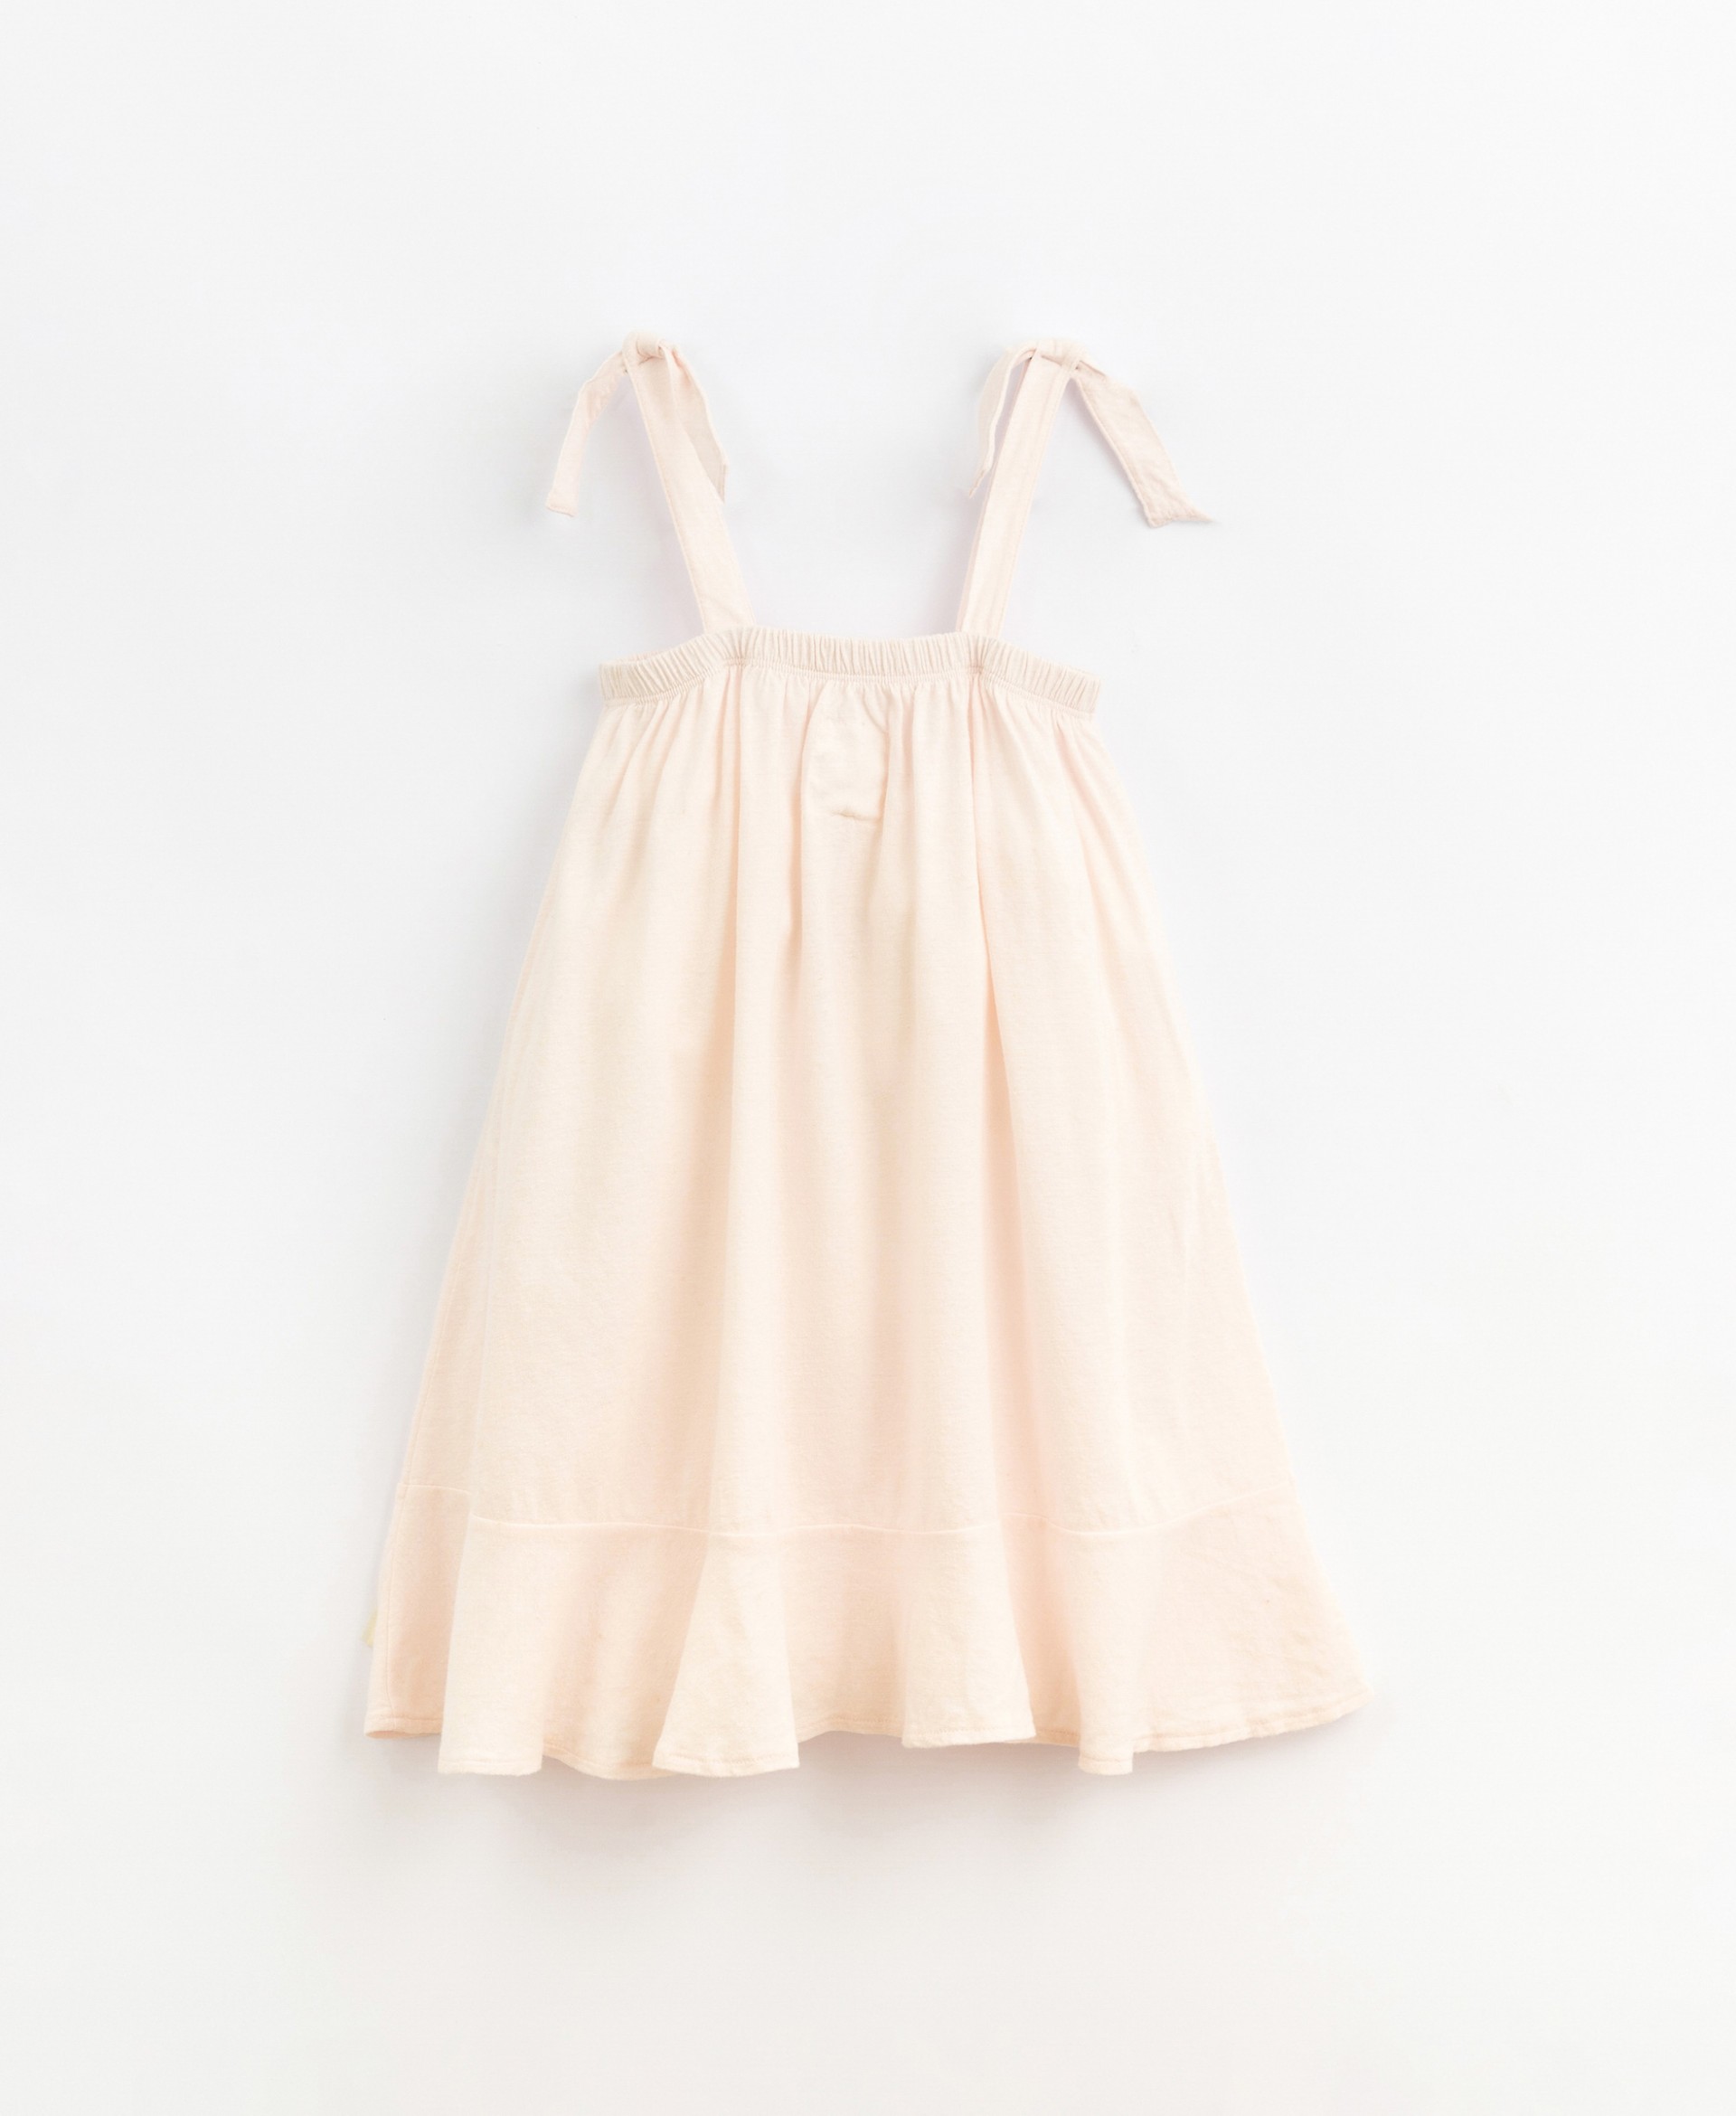 Dress in blend of organic cotton and linen | Basketry